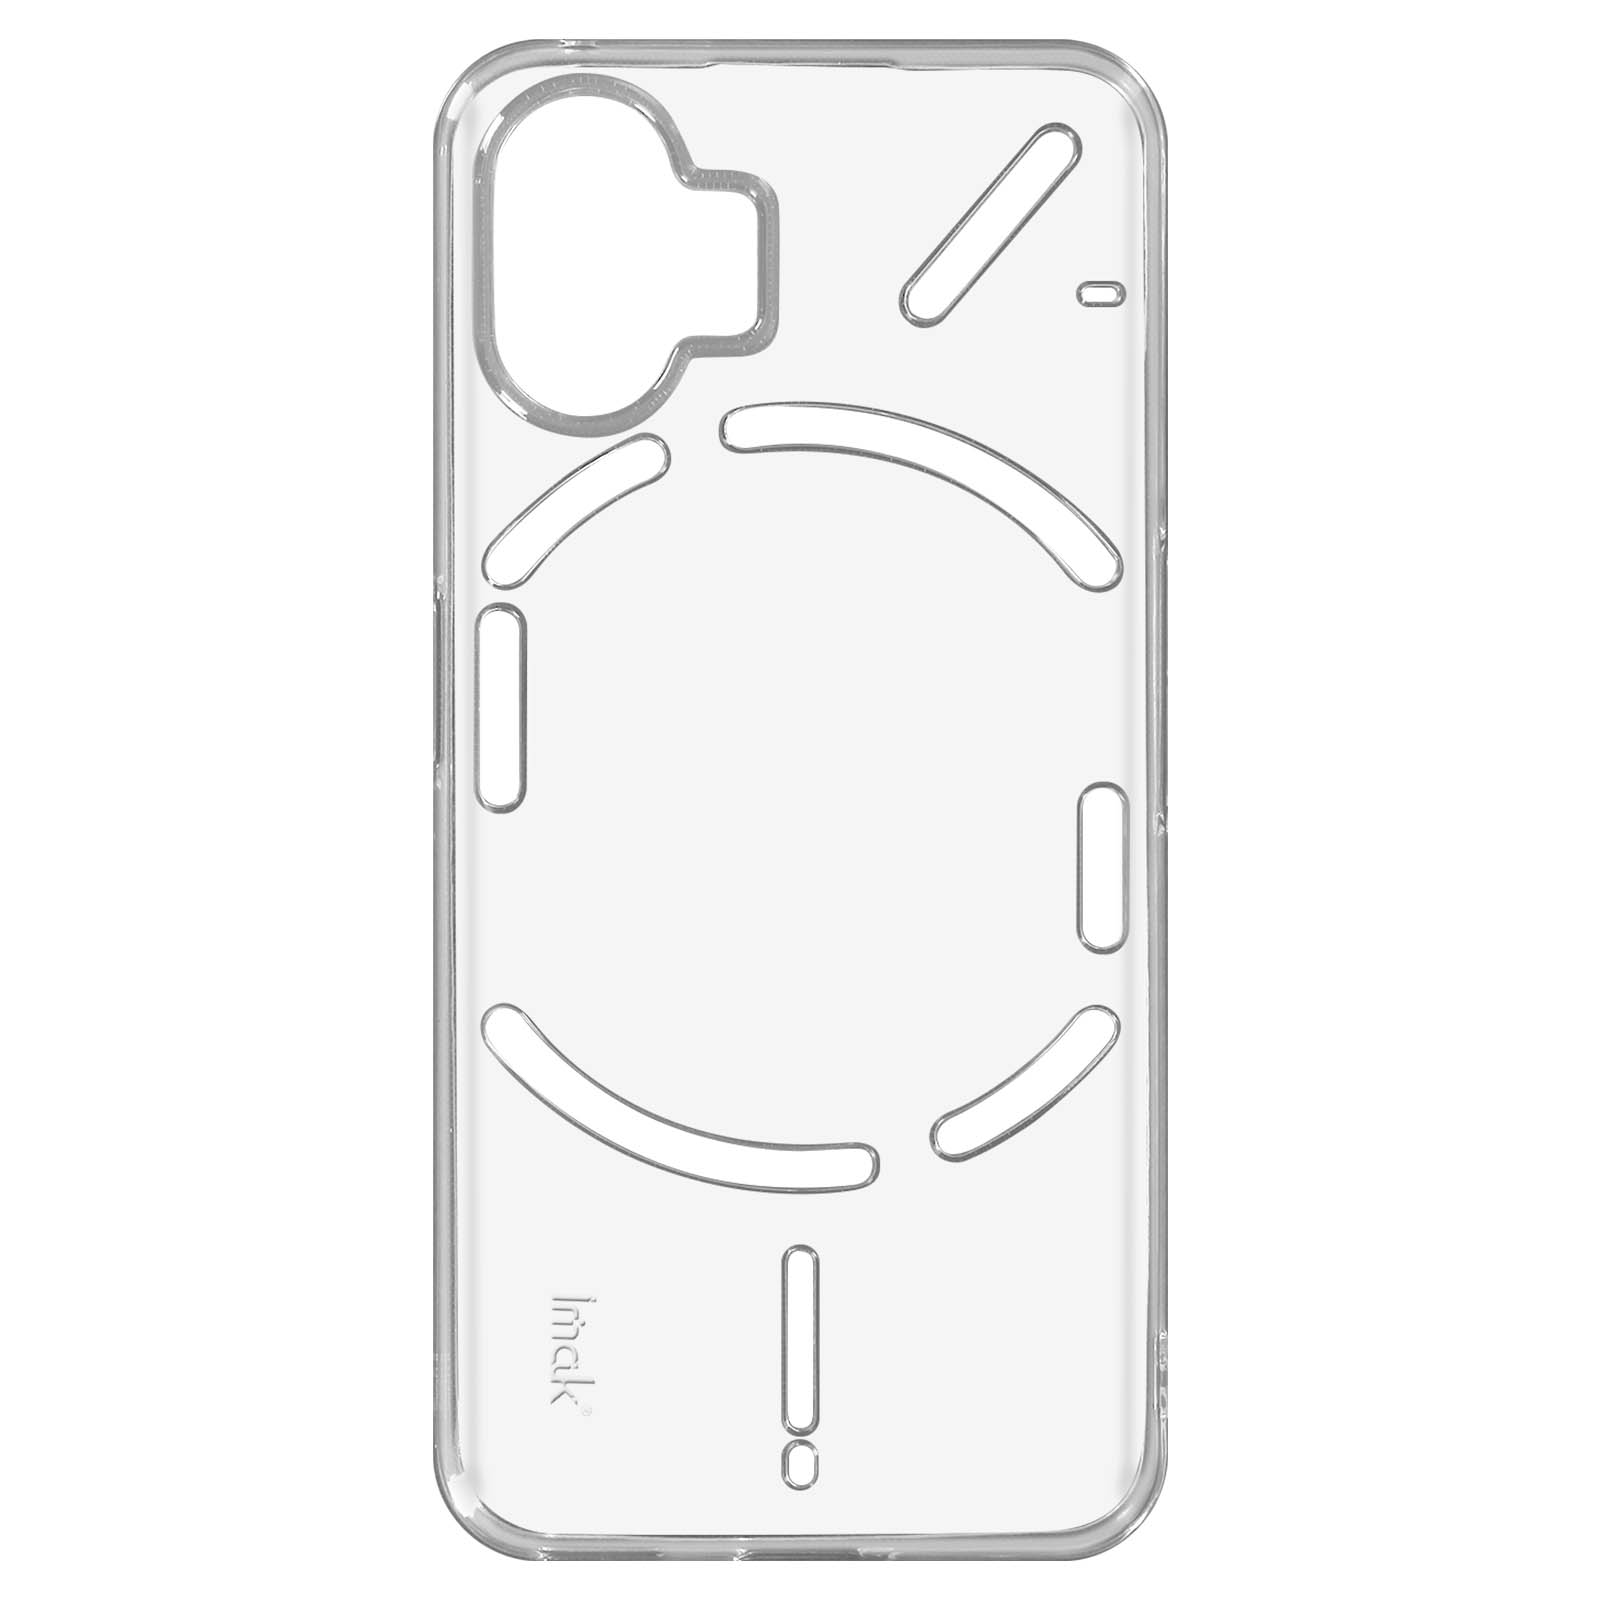 2, Backcover, UX-5 Nothing, Series, Transparent IMAK Phone